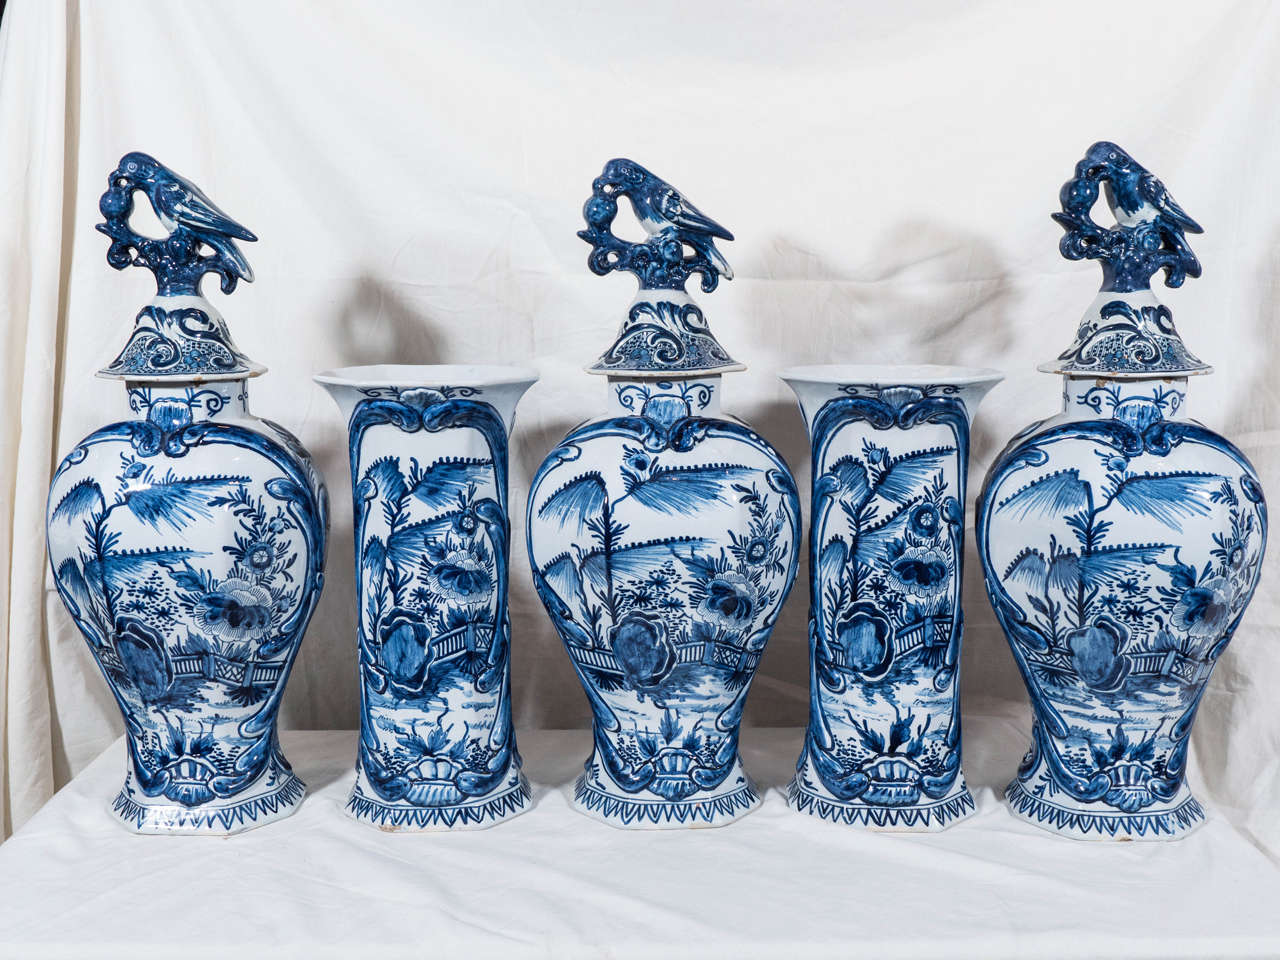 A Dutch five-piece garnitures decorated in cobalt with a lovely garden scene showing a flowering tree, a large peony, and a garden fence. The three covers have traditional bird and ball finials. The reverse of each vase is decorated with an